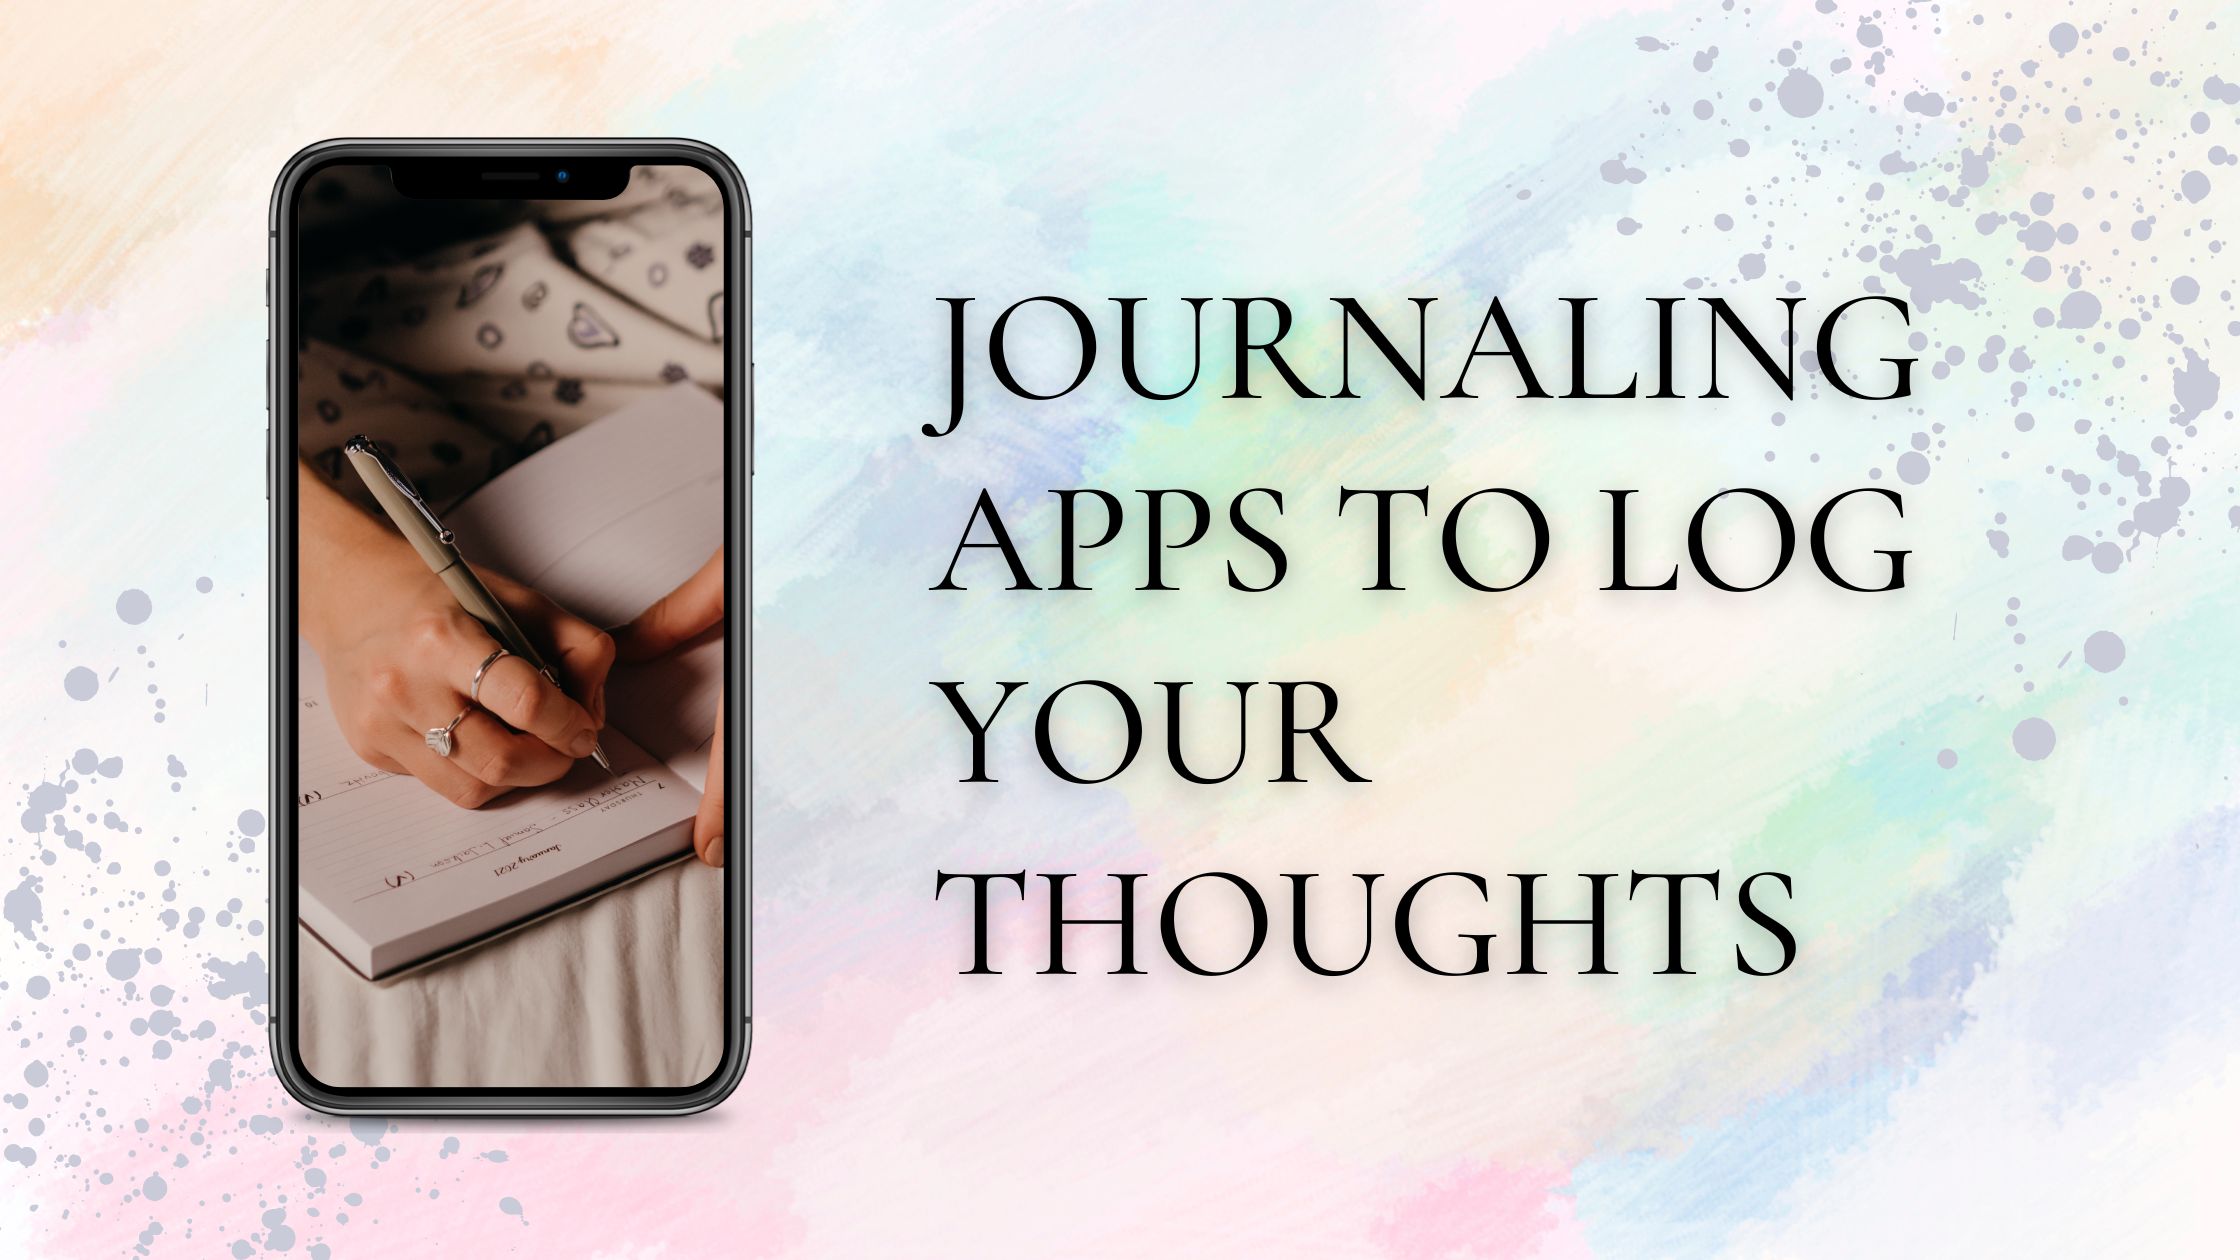 Journaling apps to log your thoughts